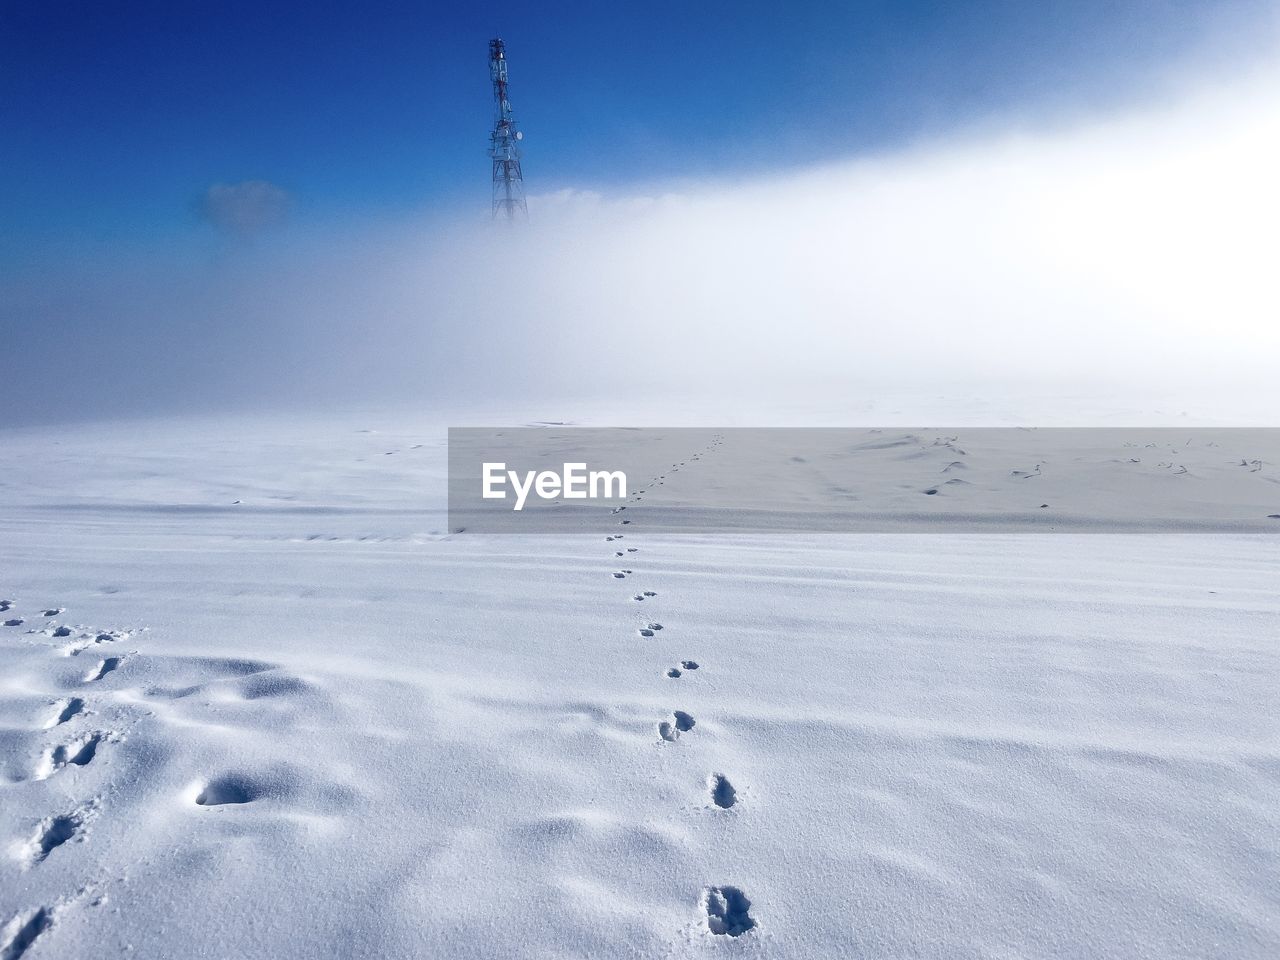 Footprints in the snow leading to a tower in the distance